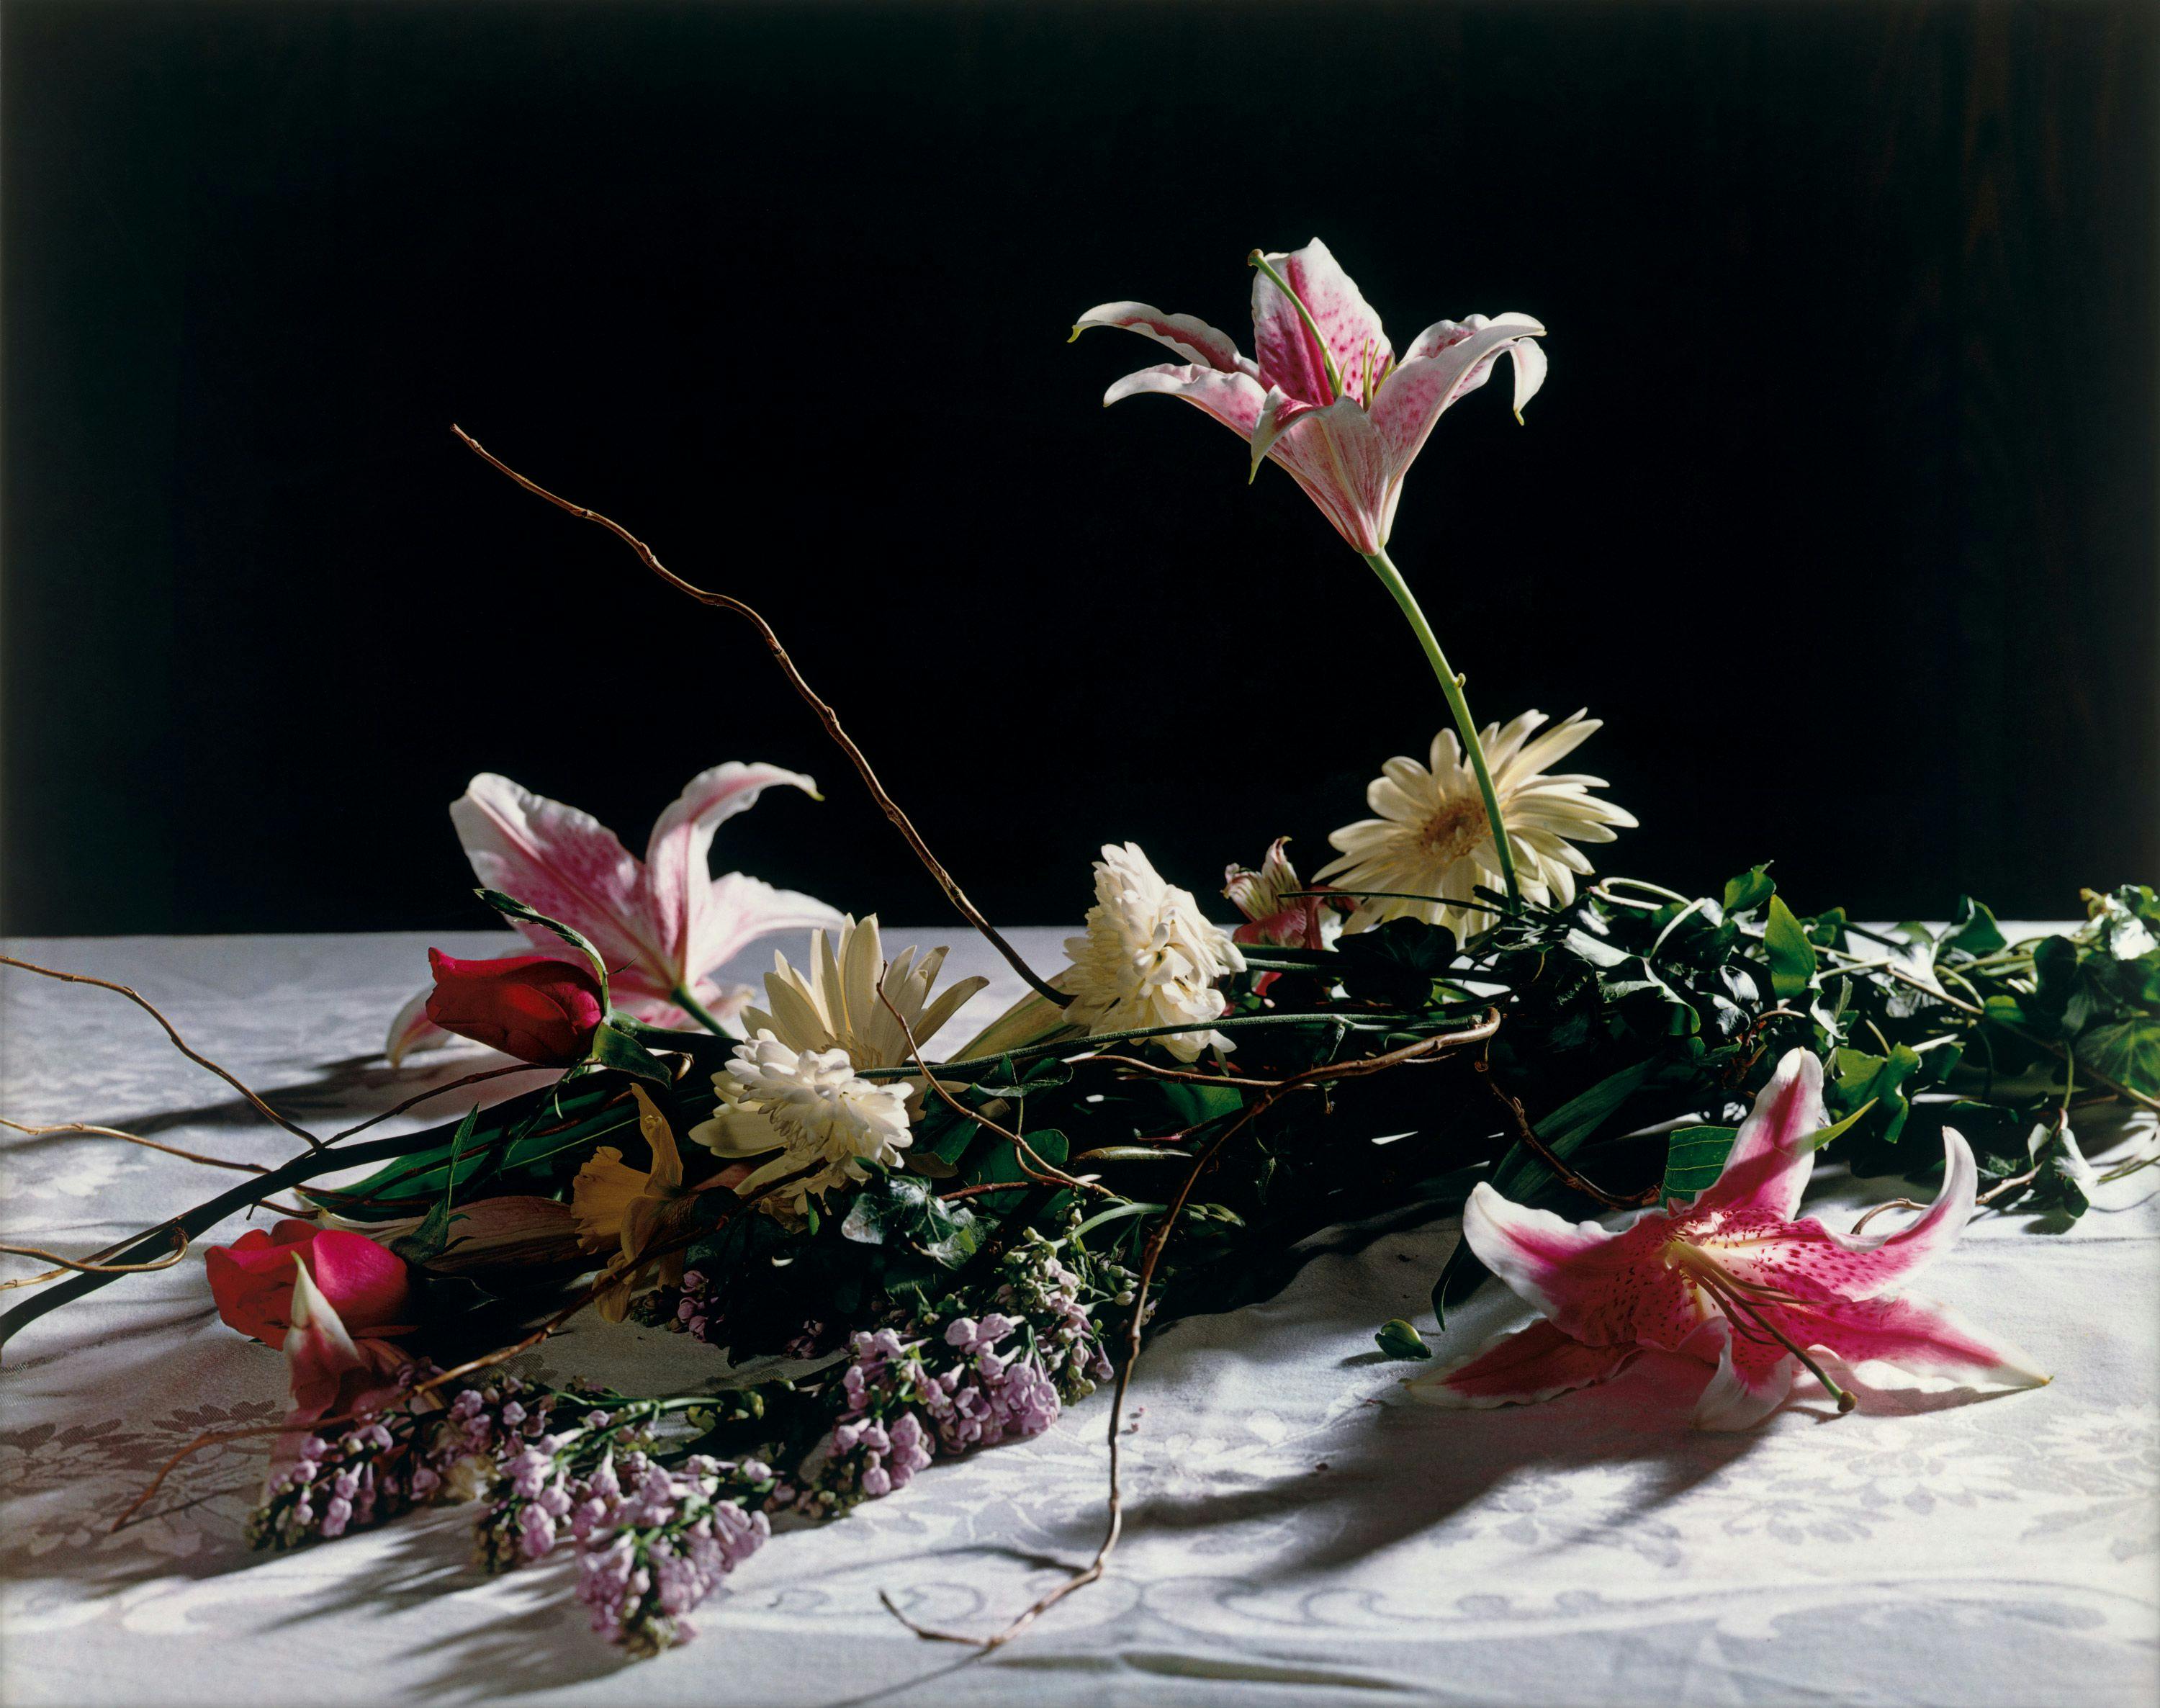 A photograph by Christopher Williams, titled Bouquet, for Bas Jan Ader and Christopher D'Arcangelo, dated 1991.